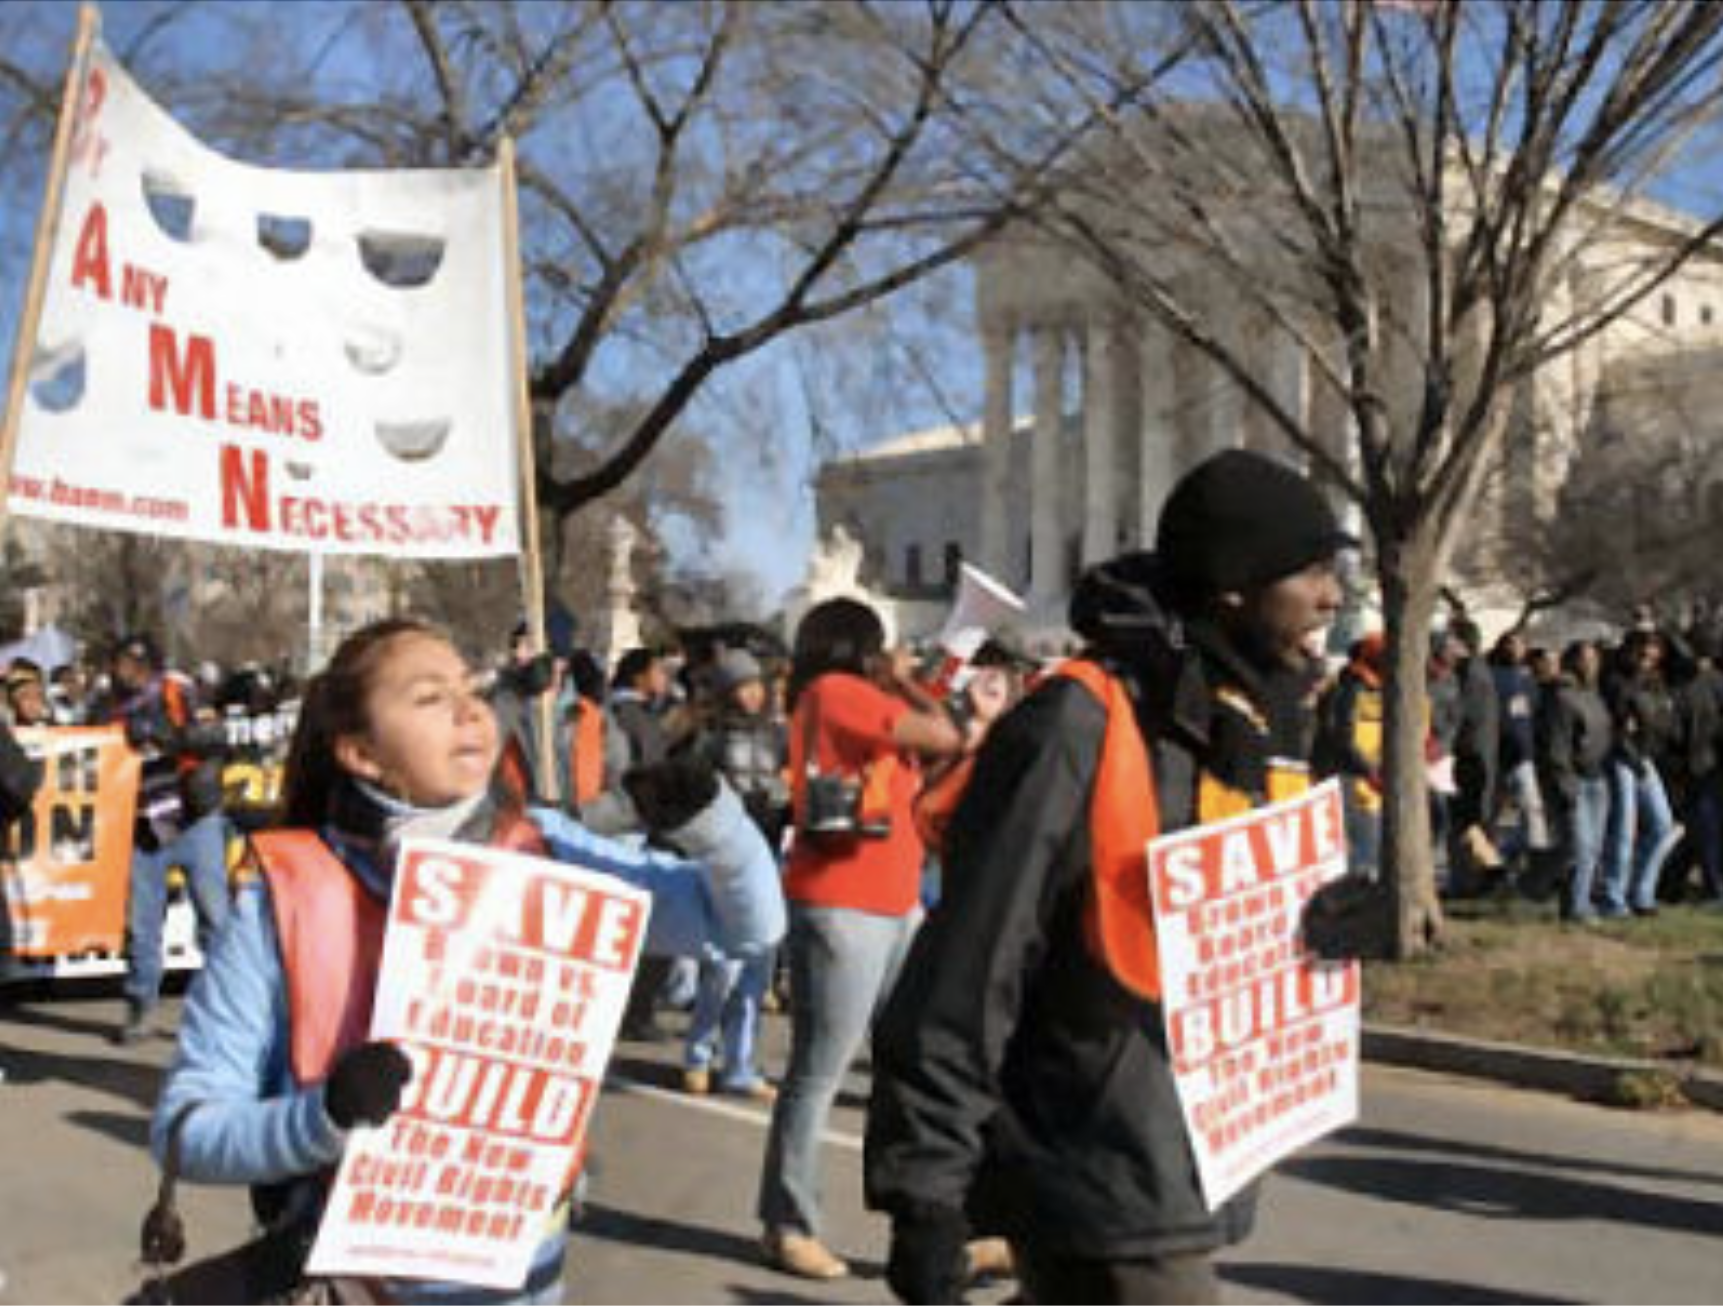 Citizens take part in an Affirmative Action march on Feb. 12 2013 in Washington D.C. led by The Coalition to Defend Affirmative Action.  